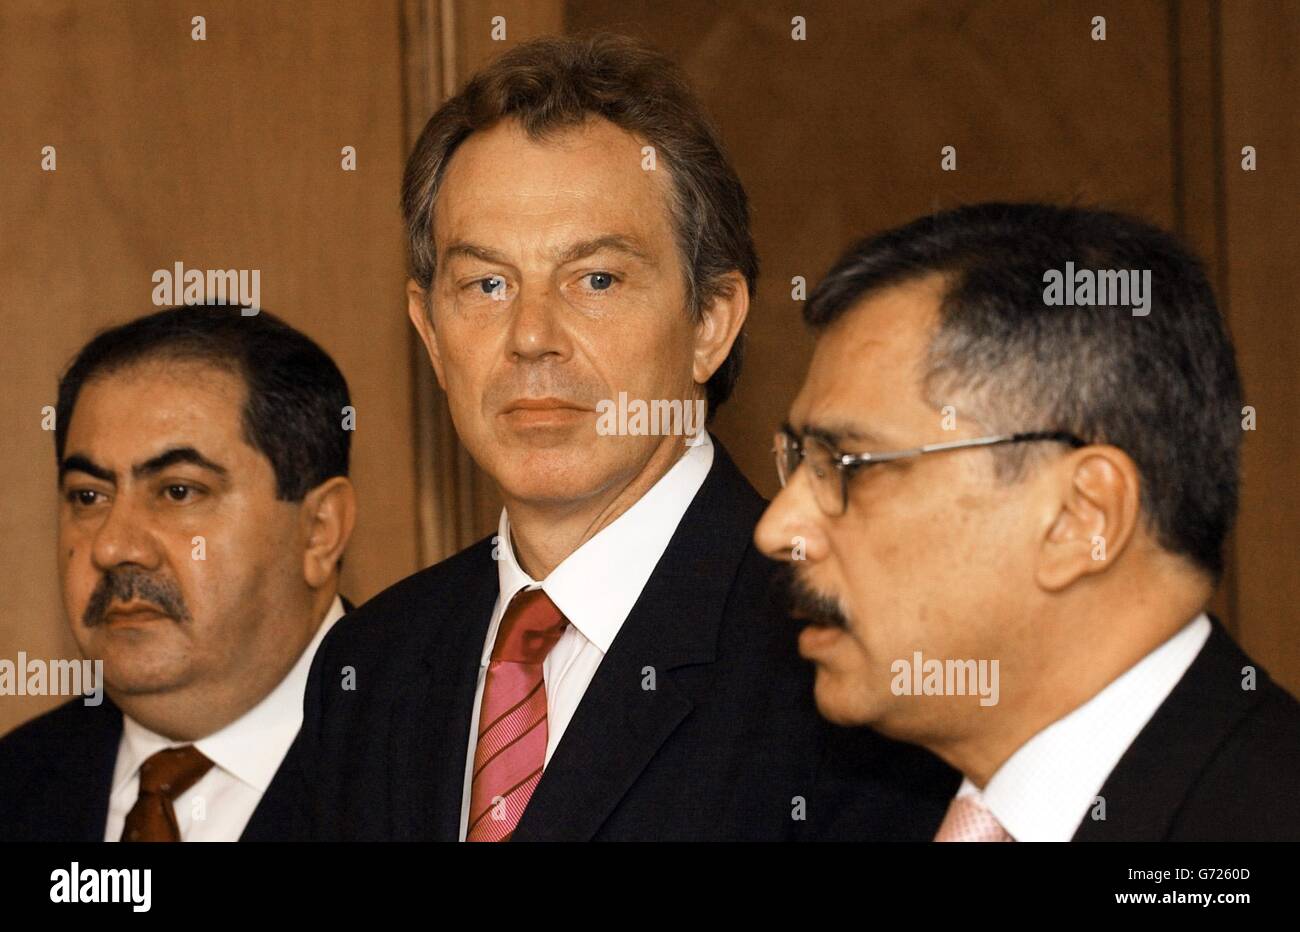 Prime Minister Tony Blair (centre) holds a news conference with Iraqi Foreign Minister Hoshyar Zebari (left) and Iraqi Defence Minister Hazim al - Shalan after holding talks with them at the NATO Summit in Istanbul. The US-led coalition has transferred sovereignty to an interim Iraqi government in Baghdad , speeding up the move by two days in an apparent bid to surprise insurgents who may have tried to sabotage the step toward self rule. Stock Photo